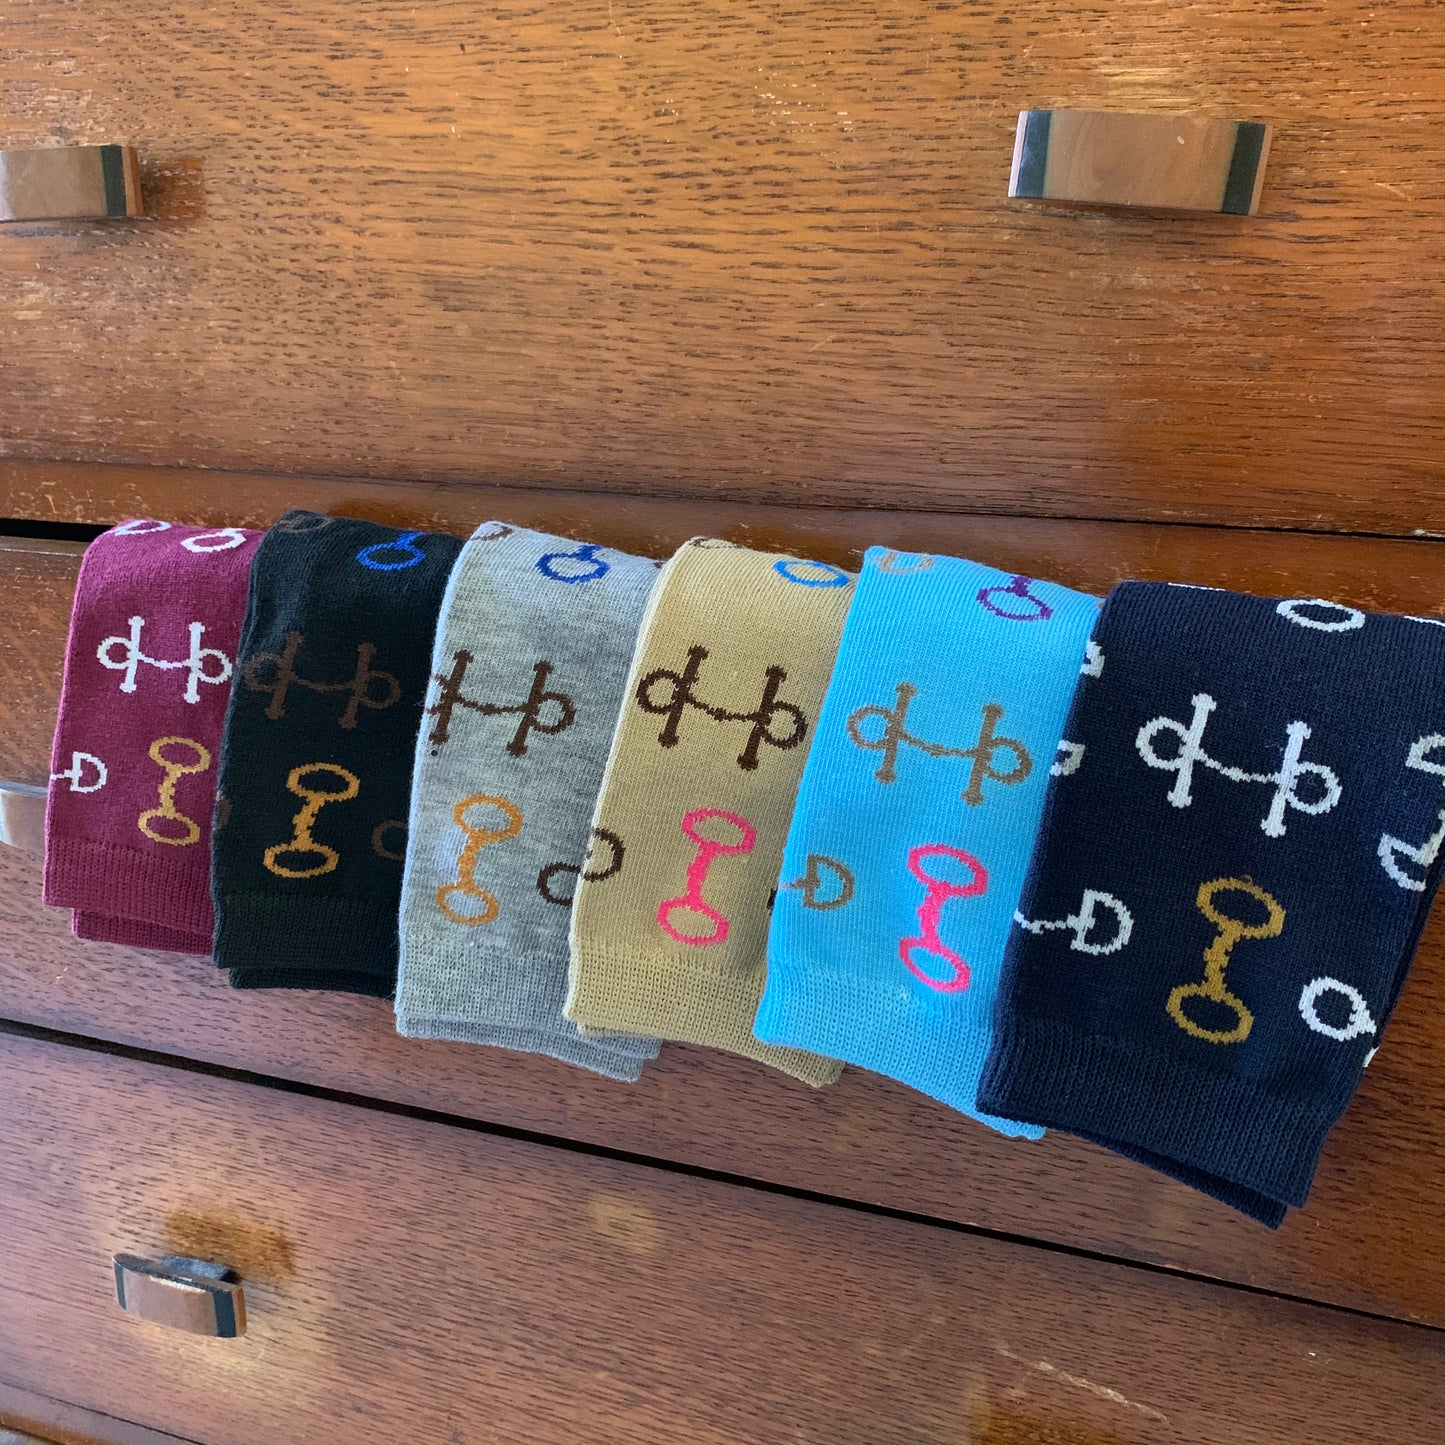 Socks in Maroon Black Grey Tan Aqua and Navy Hanging Over Dresser Drawer with Multi-Color Snaffle Bits in White Brown Gold Blue and Pink